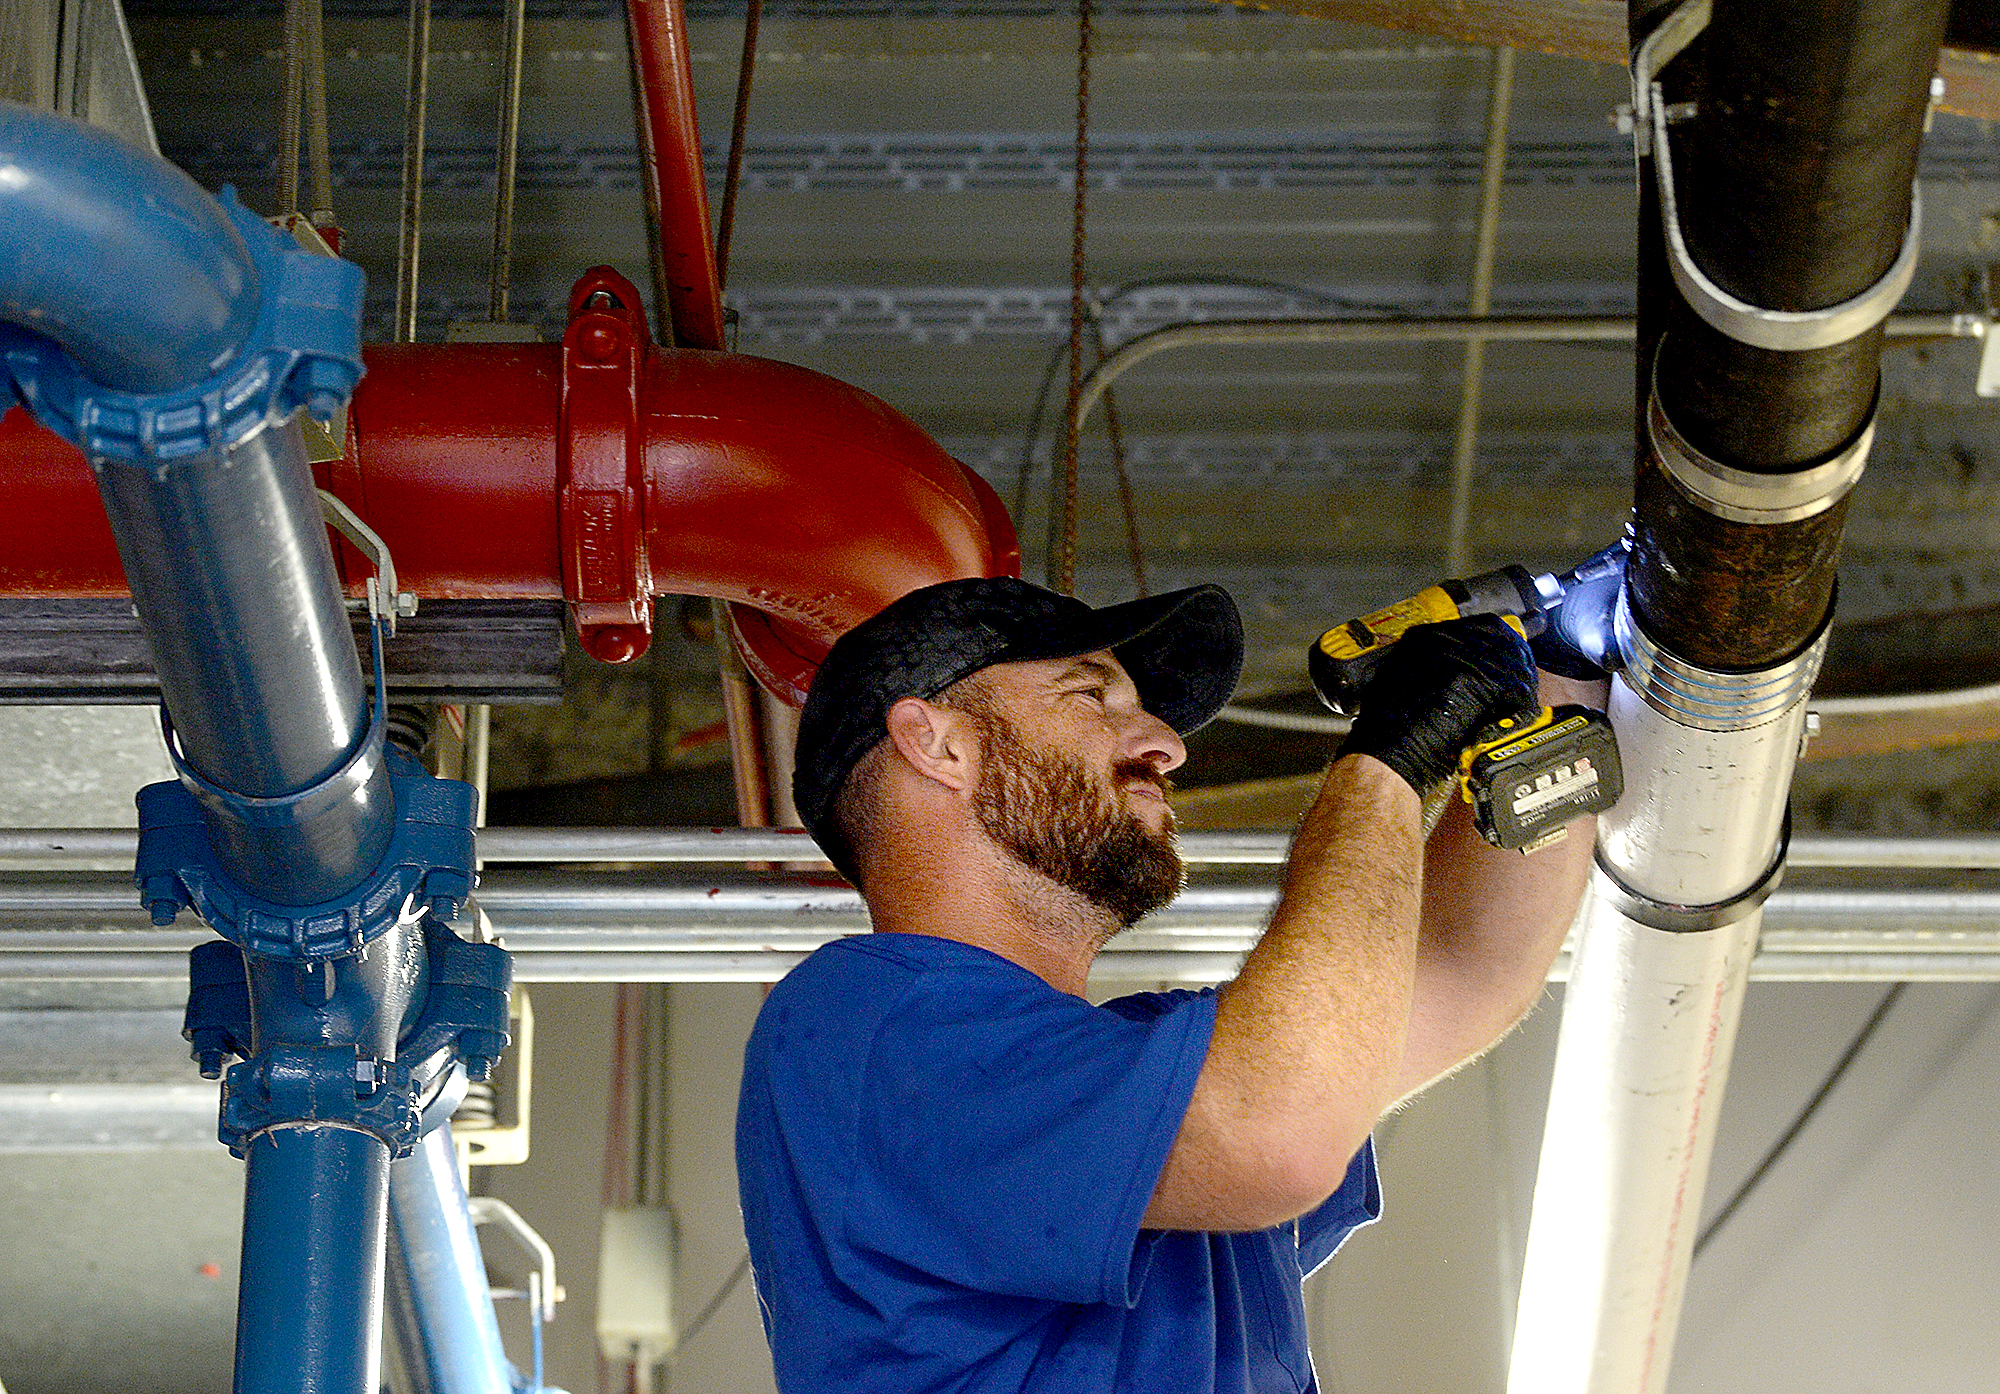 Benefits of industrial plumbing services - by Mary Martines - Medium